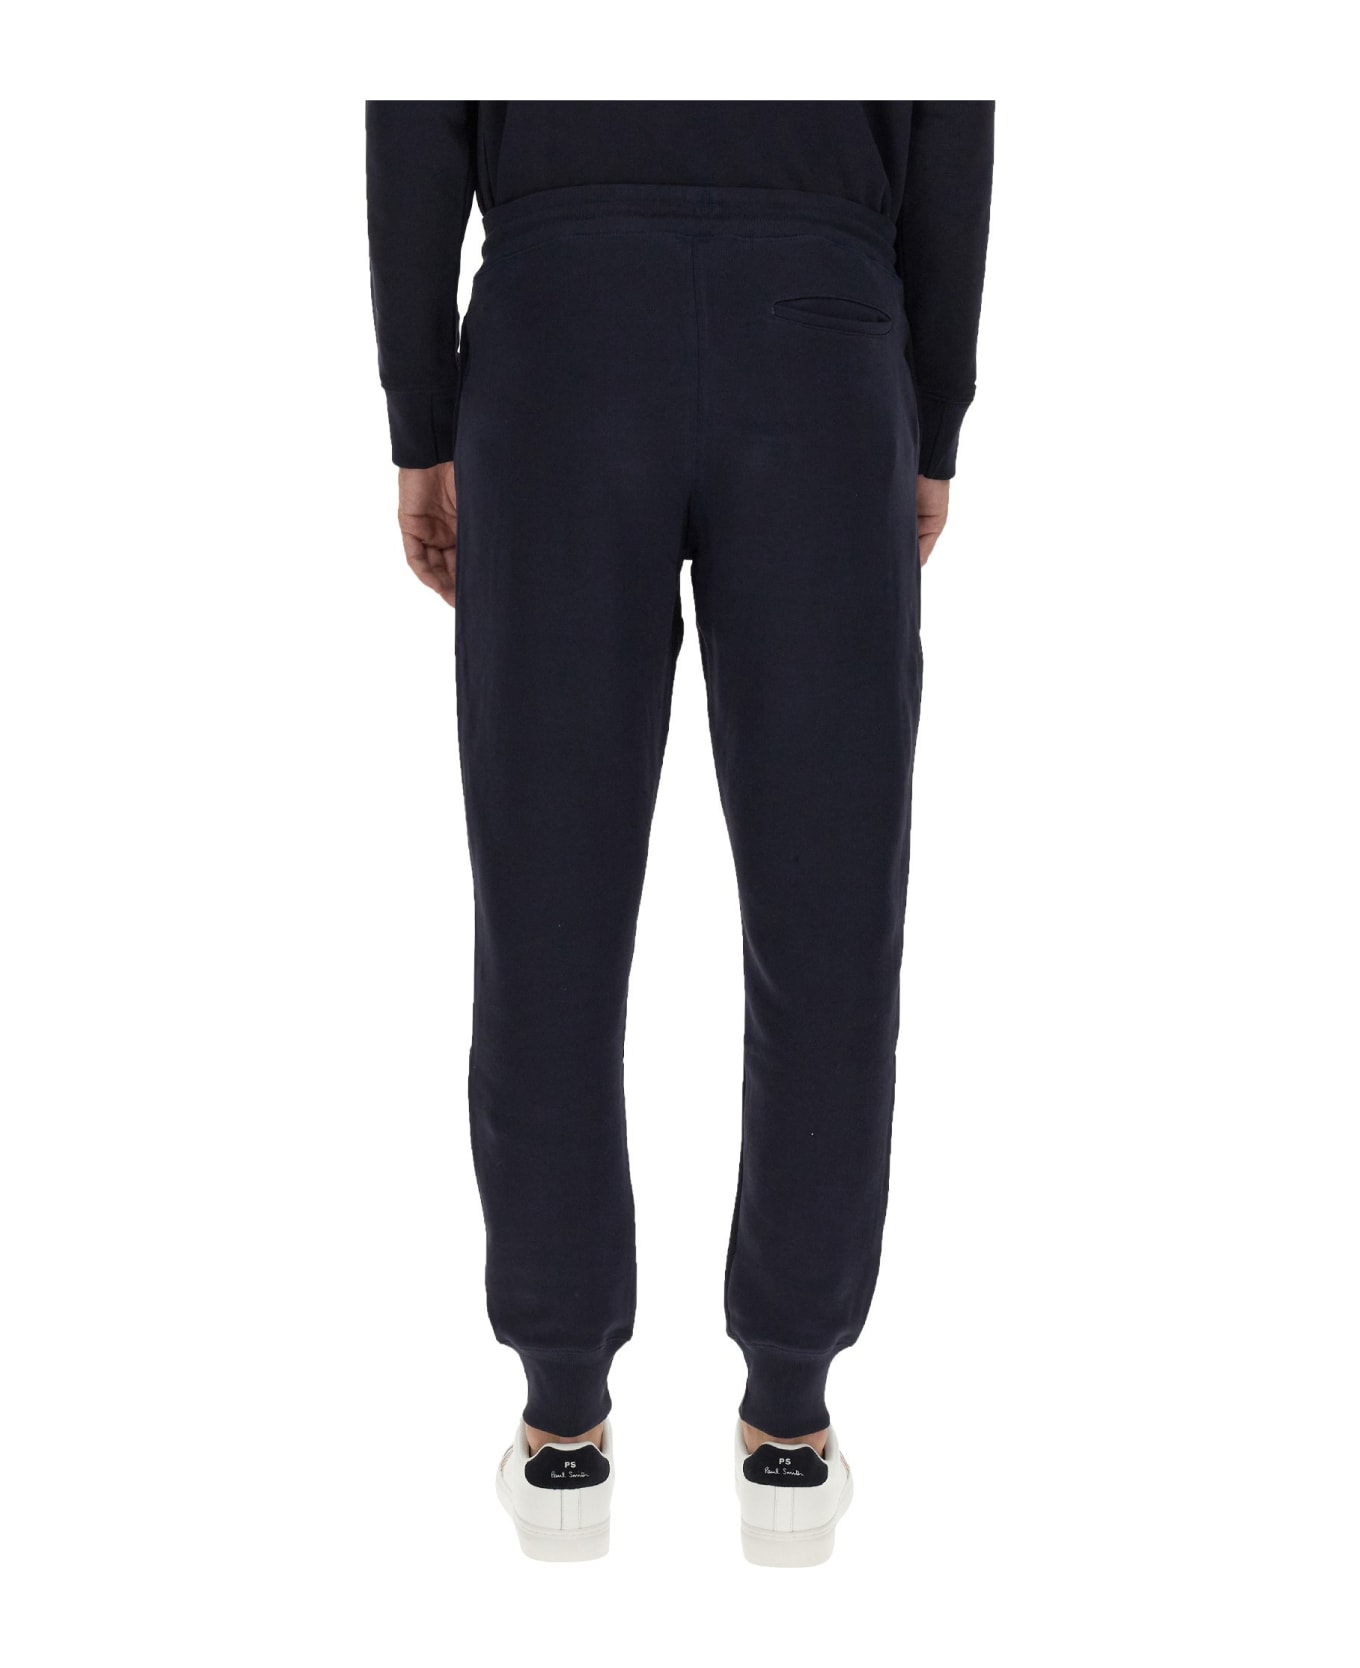 PS by Paul Smith Jogging Pants - BLUE